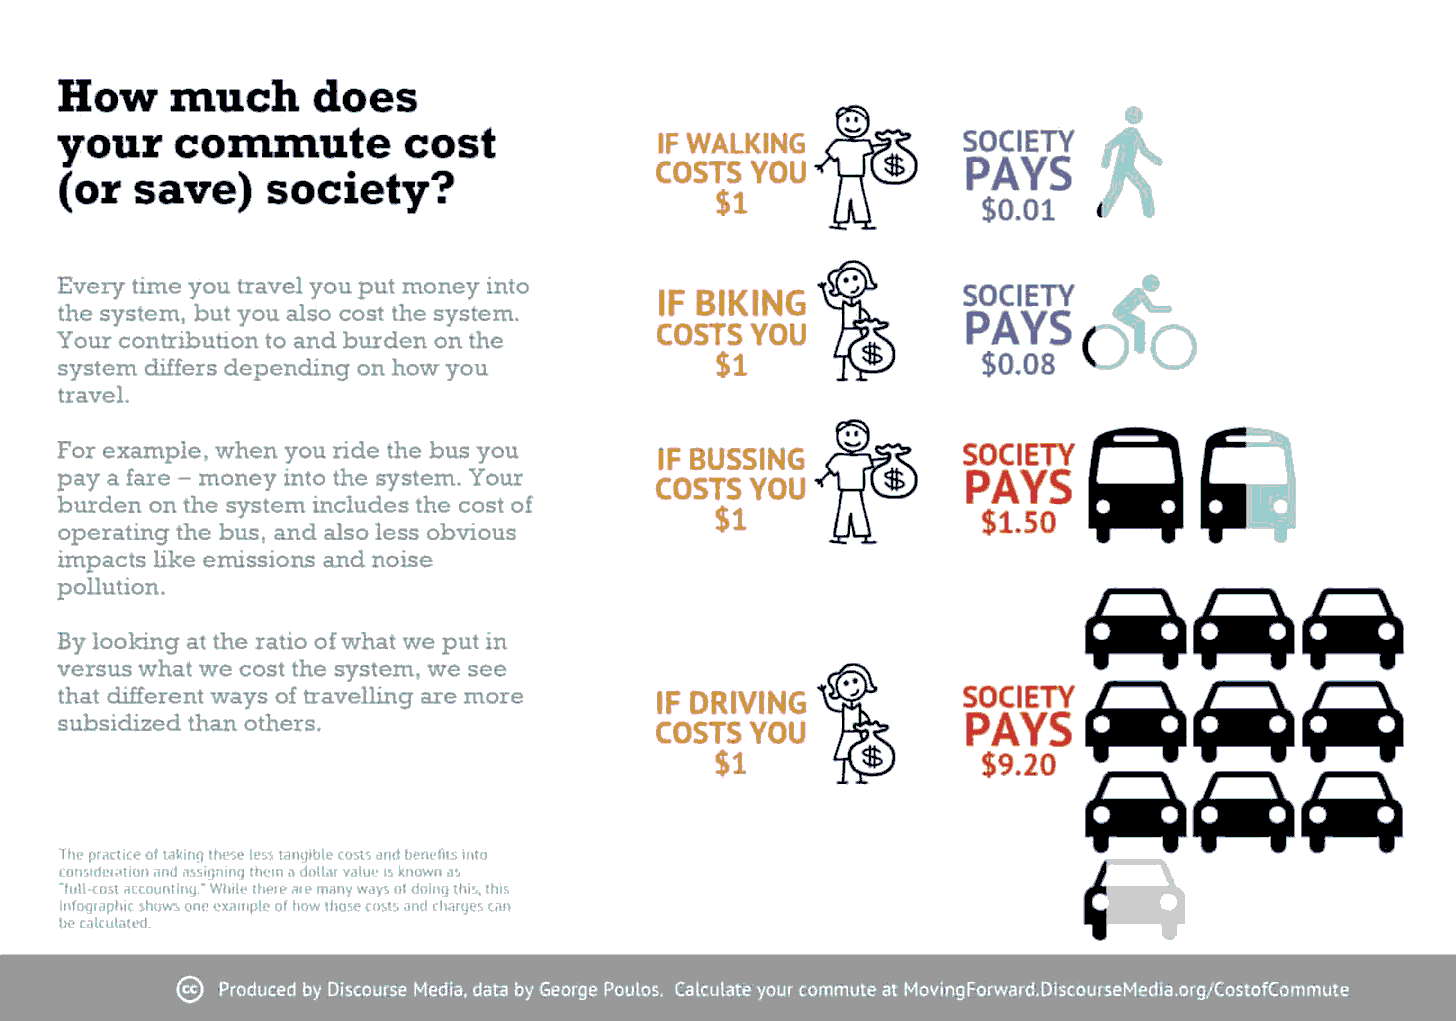 How much does your commute cost (or save) society? Every time you travel you put money into the system, but you also cost the system. Your contribution to and burden on the system differs depending on how you travel. For example, when you ride the bus you pay a fare - money into the system. Your burden on the system includes the cost of operating the bus, and also less obvious impacts like emissions and noise pollution. By looking at the ratio of what we put in versus what we cost the system, we see that different ways of travelling are more subsidized than others.